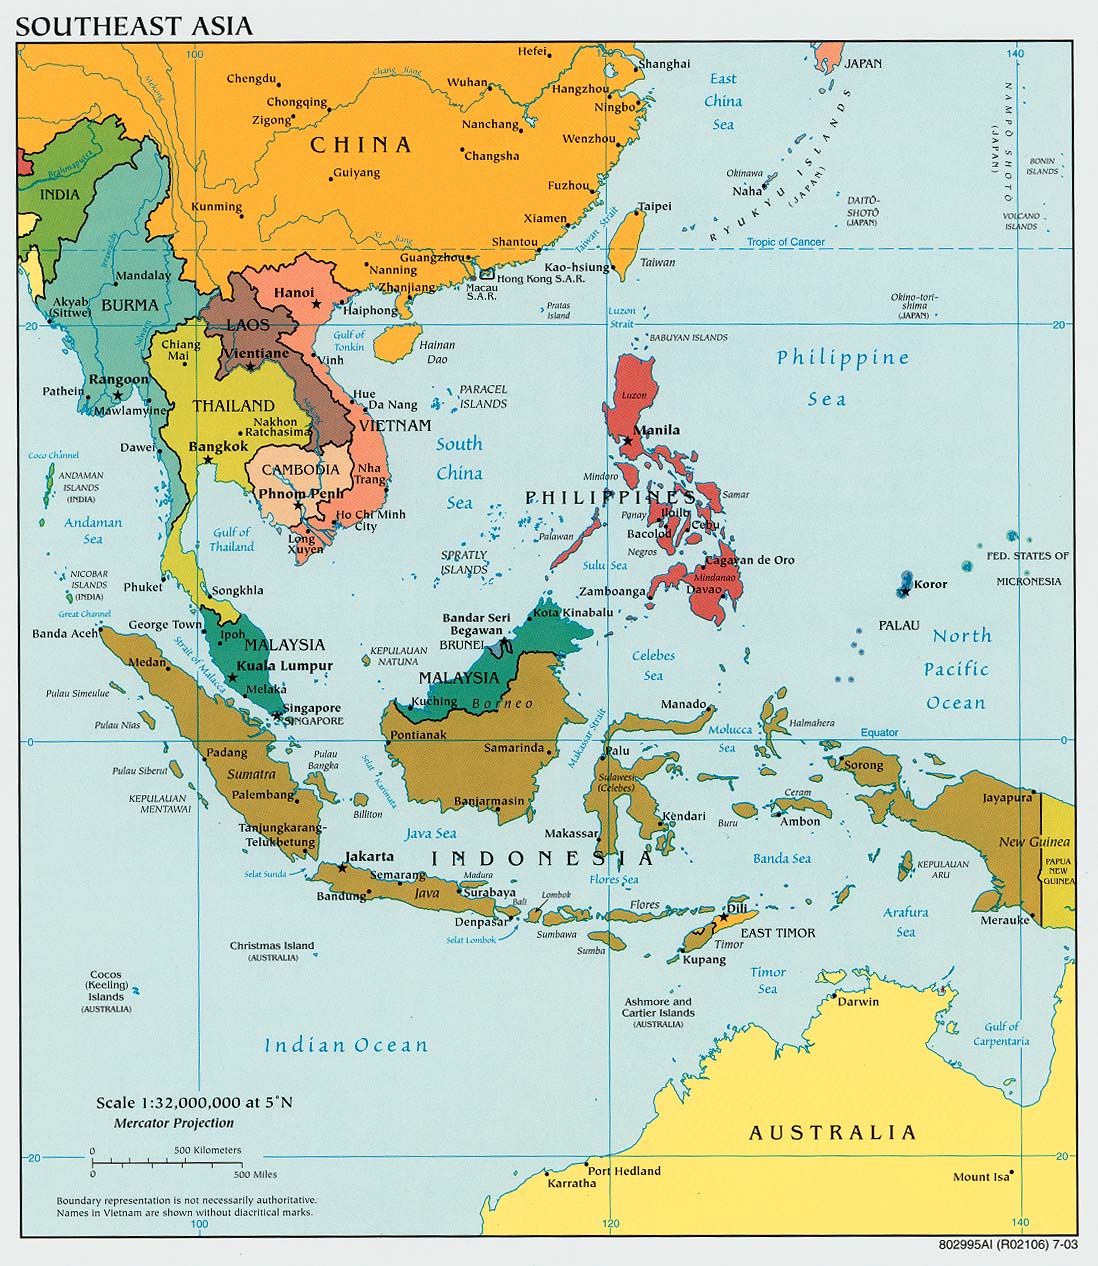 Southeast Asia Maps - Asia Maps - Map Pictures